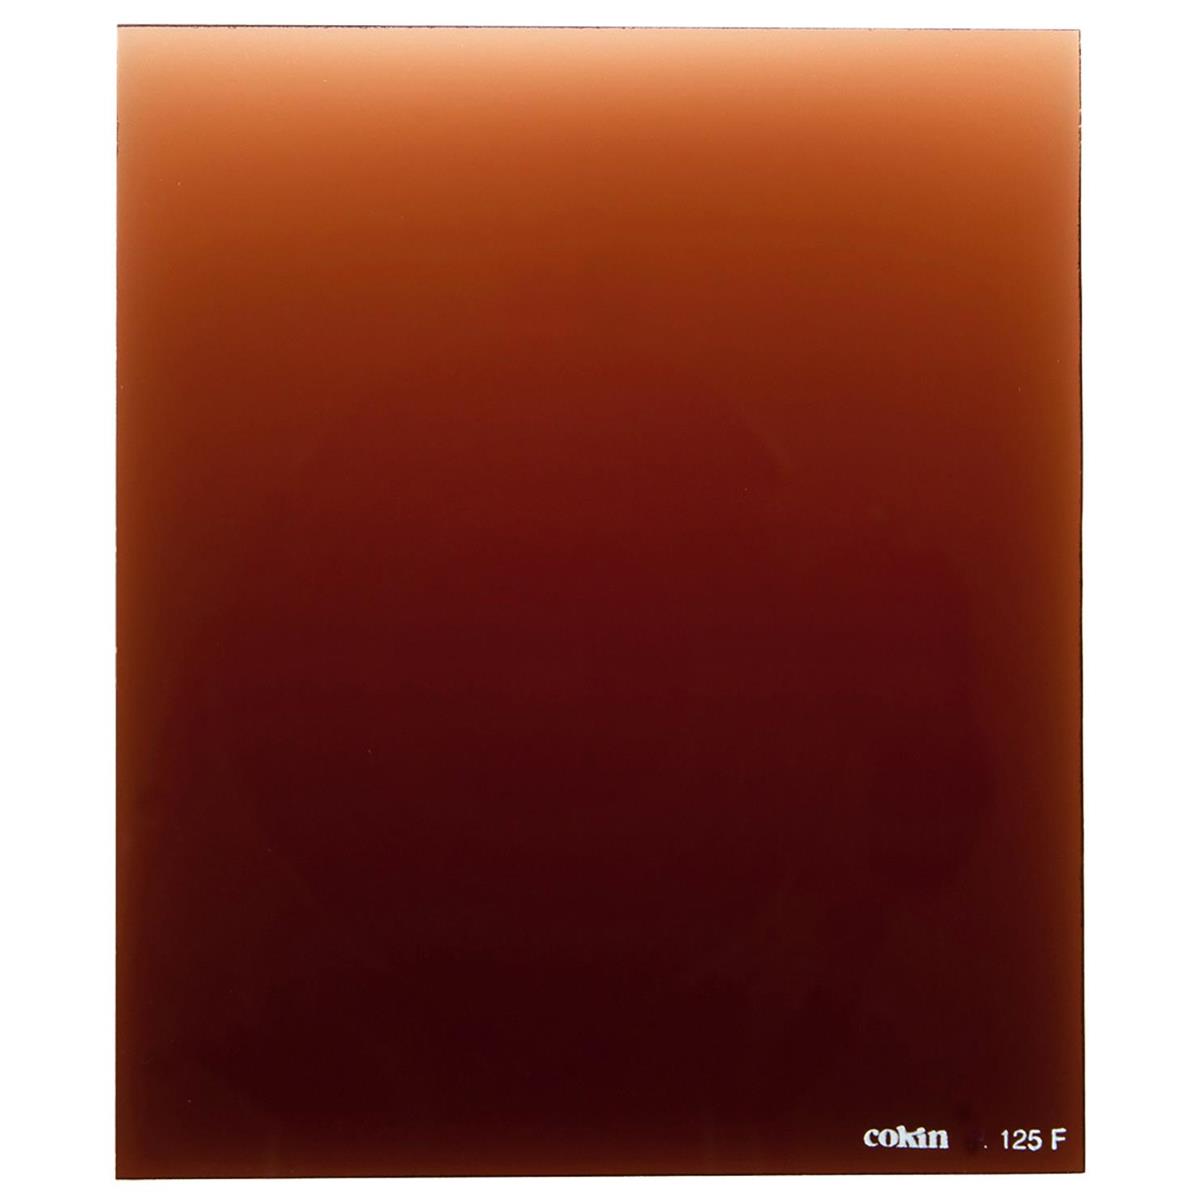 Image of Cokin XP125F T2 - Graduated Tobacco Filter - Full